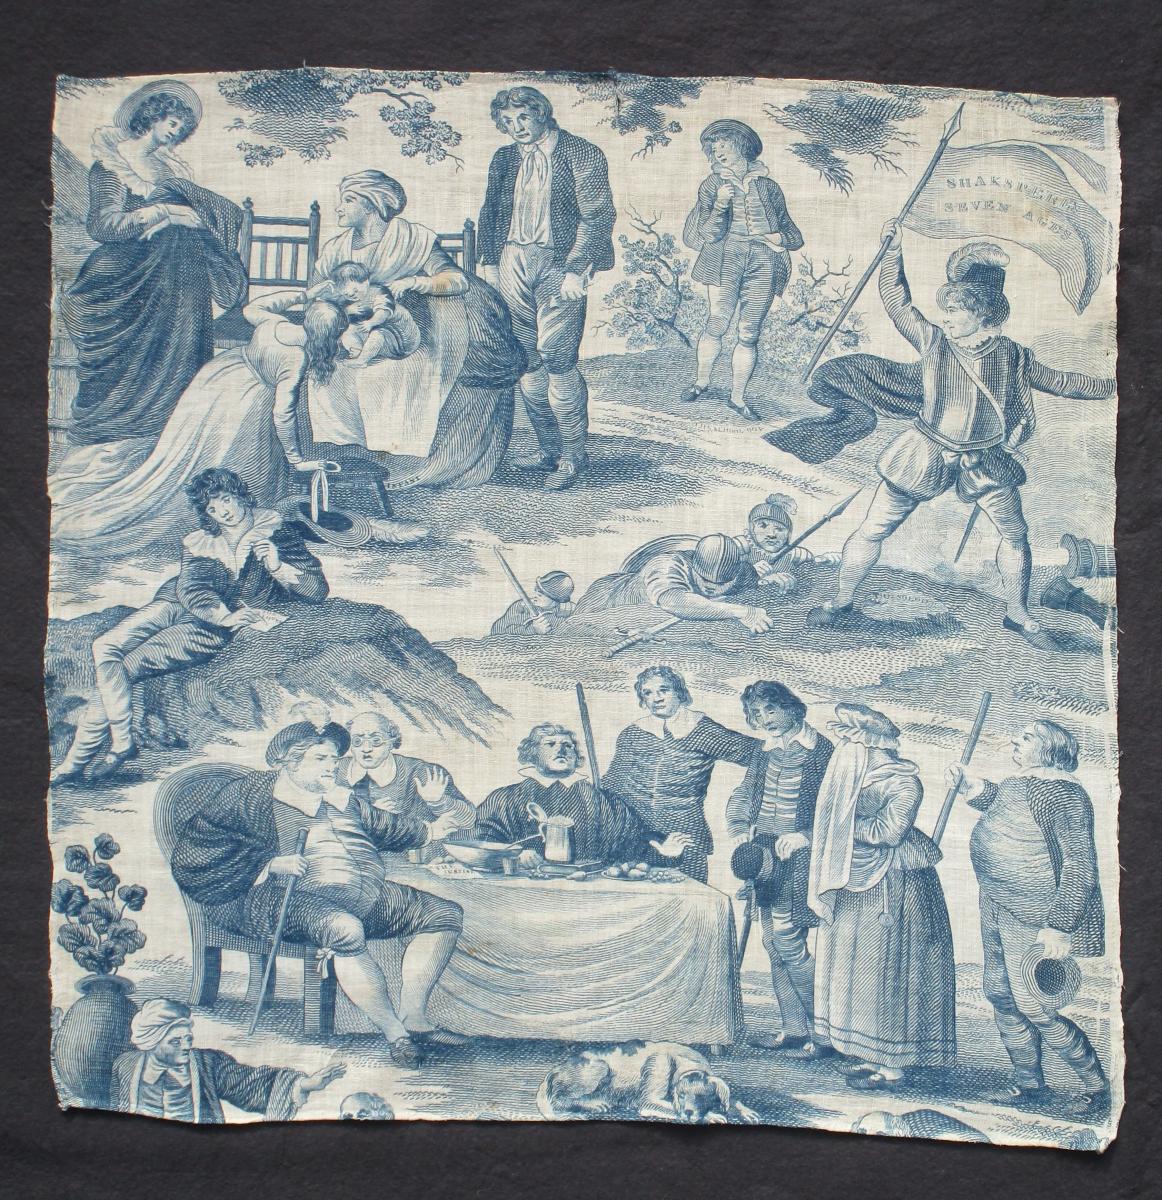 Shakespere's [sic] Seven Ages [of Man], English Print on Cotton